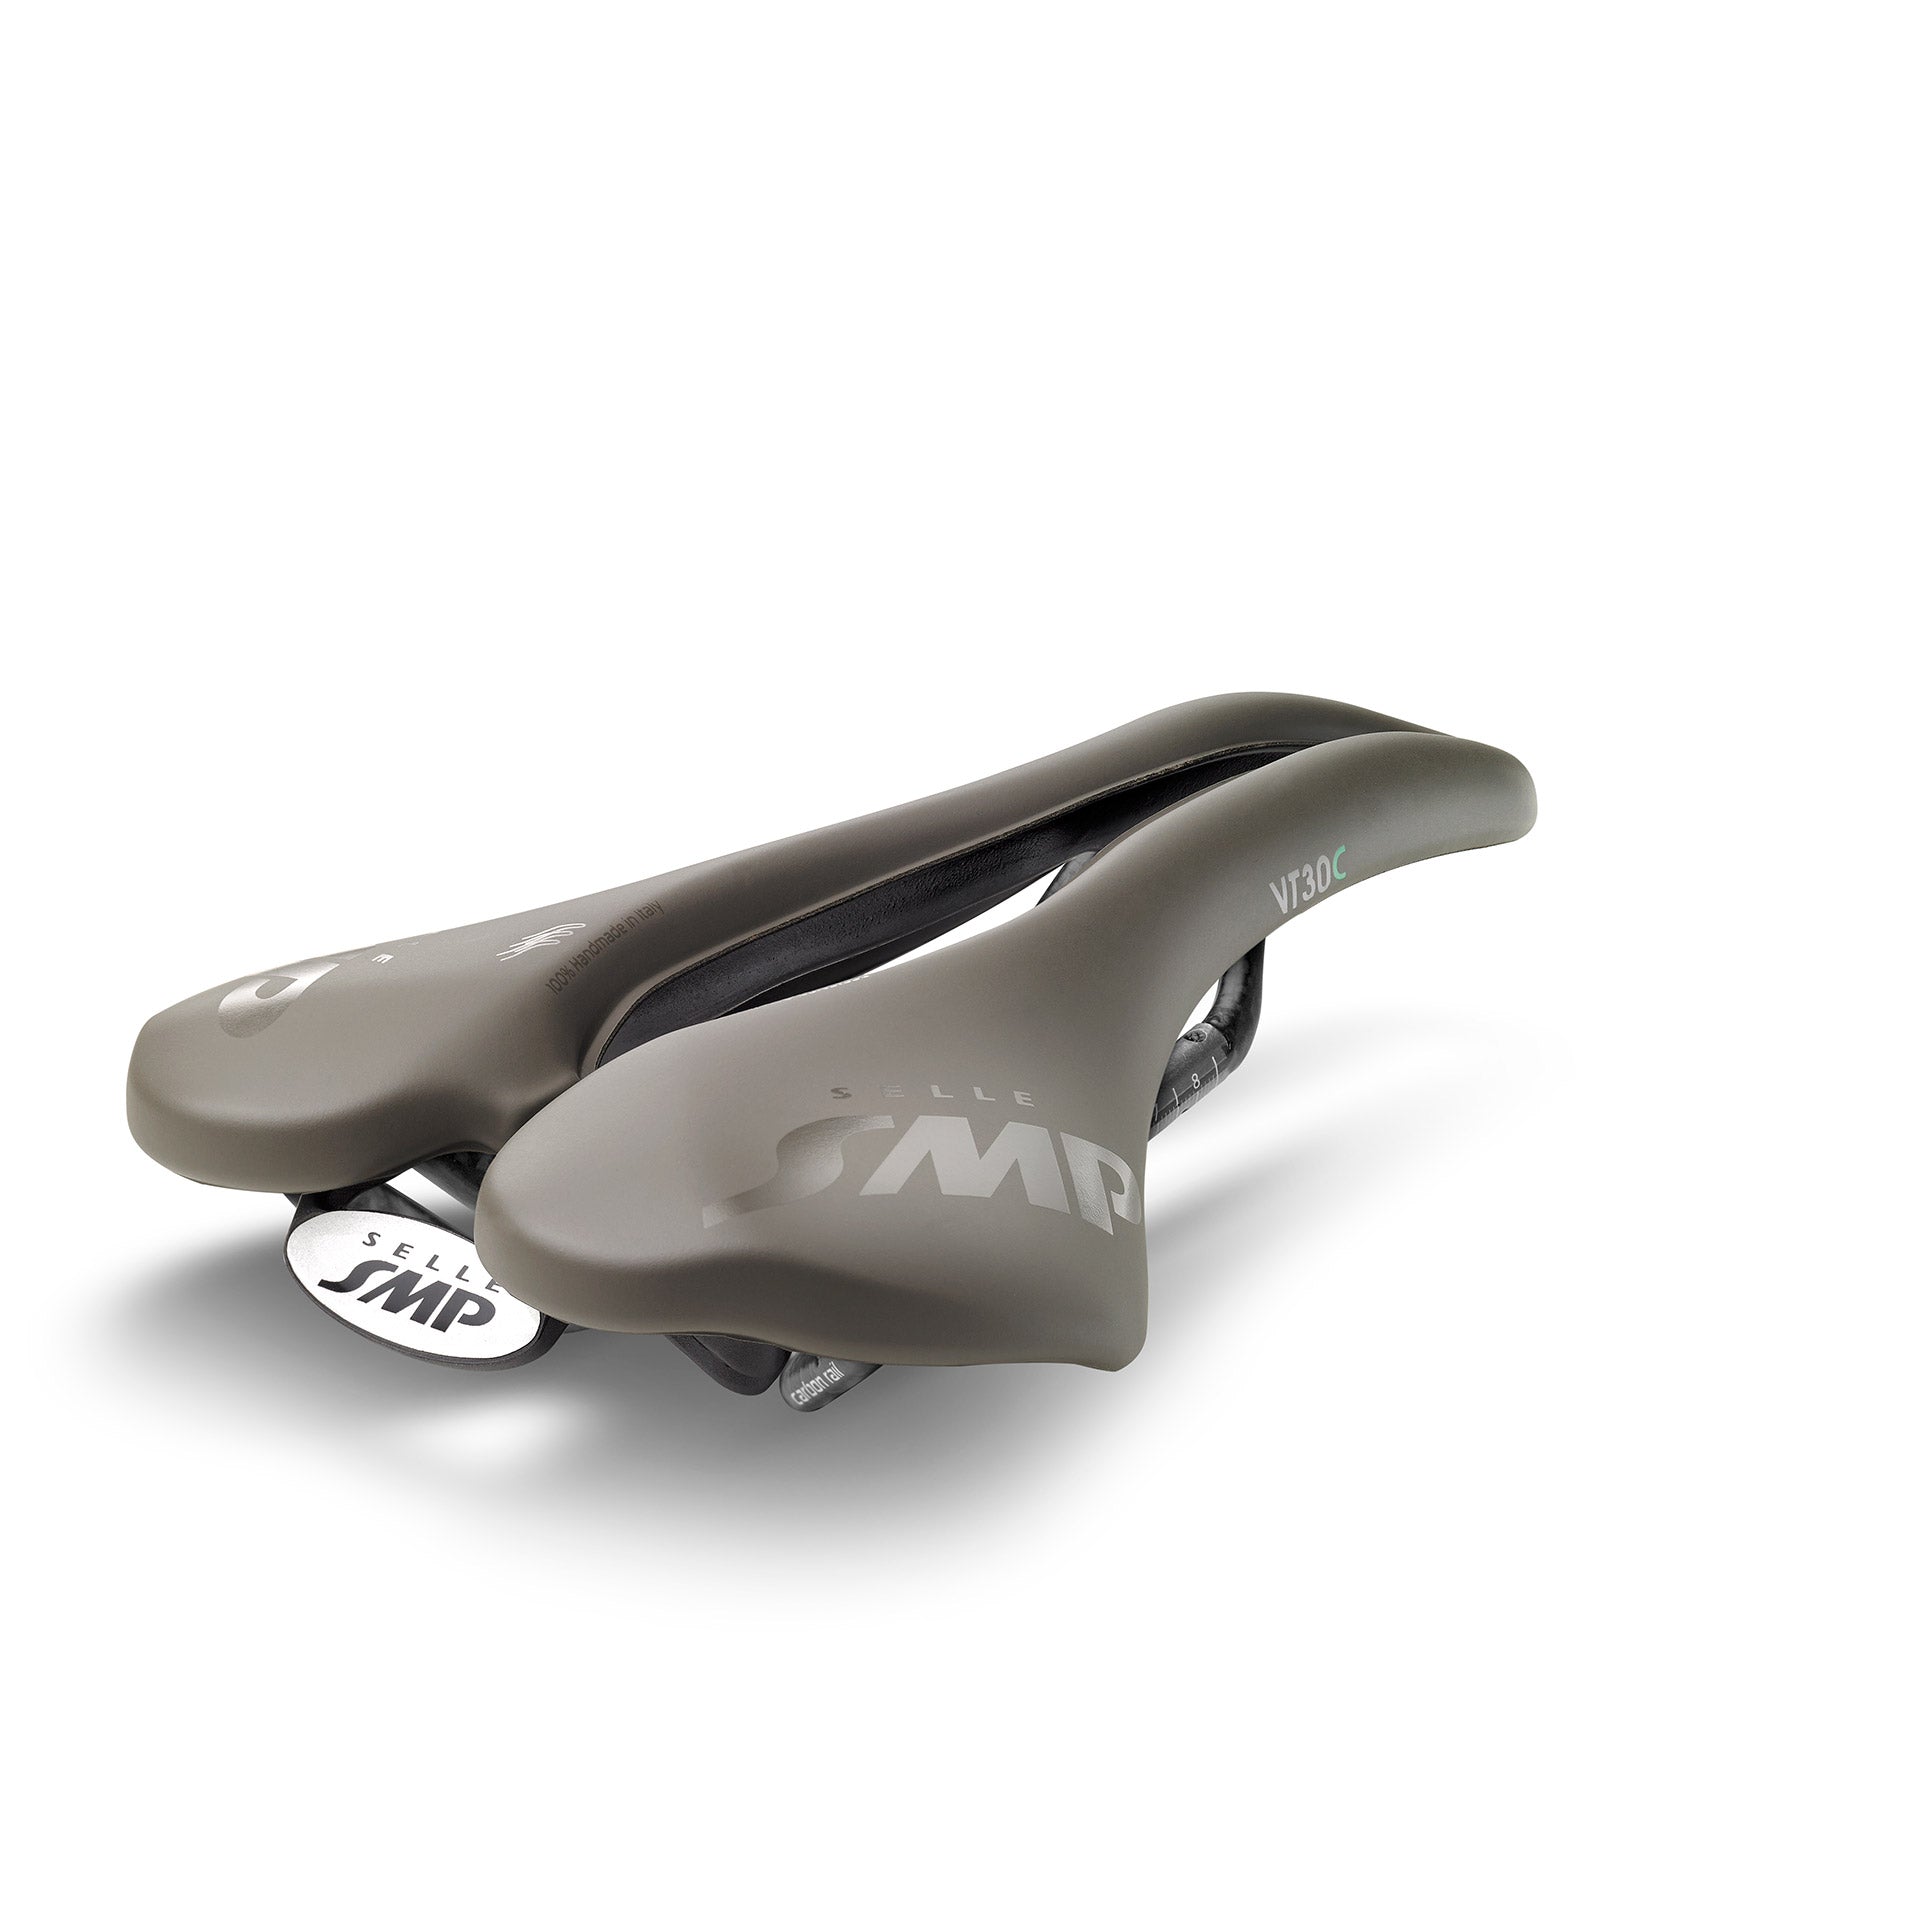 Selle SMP Selle Zadel VT30C gravel edition (compact)